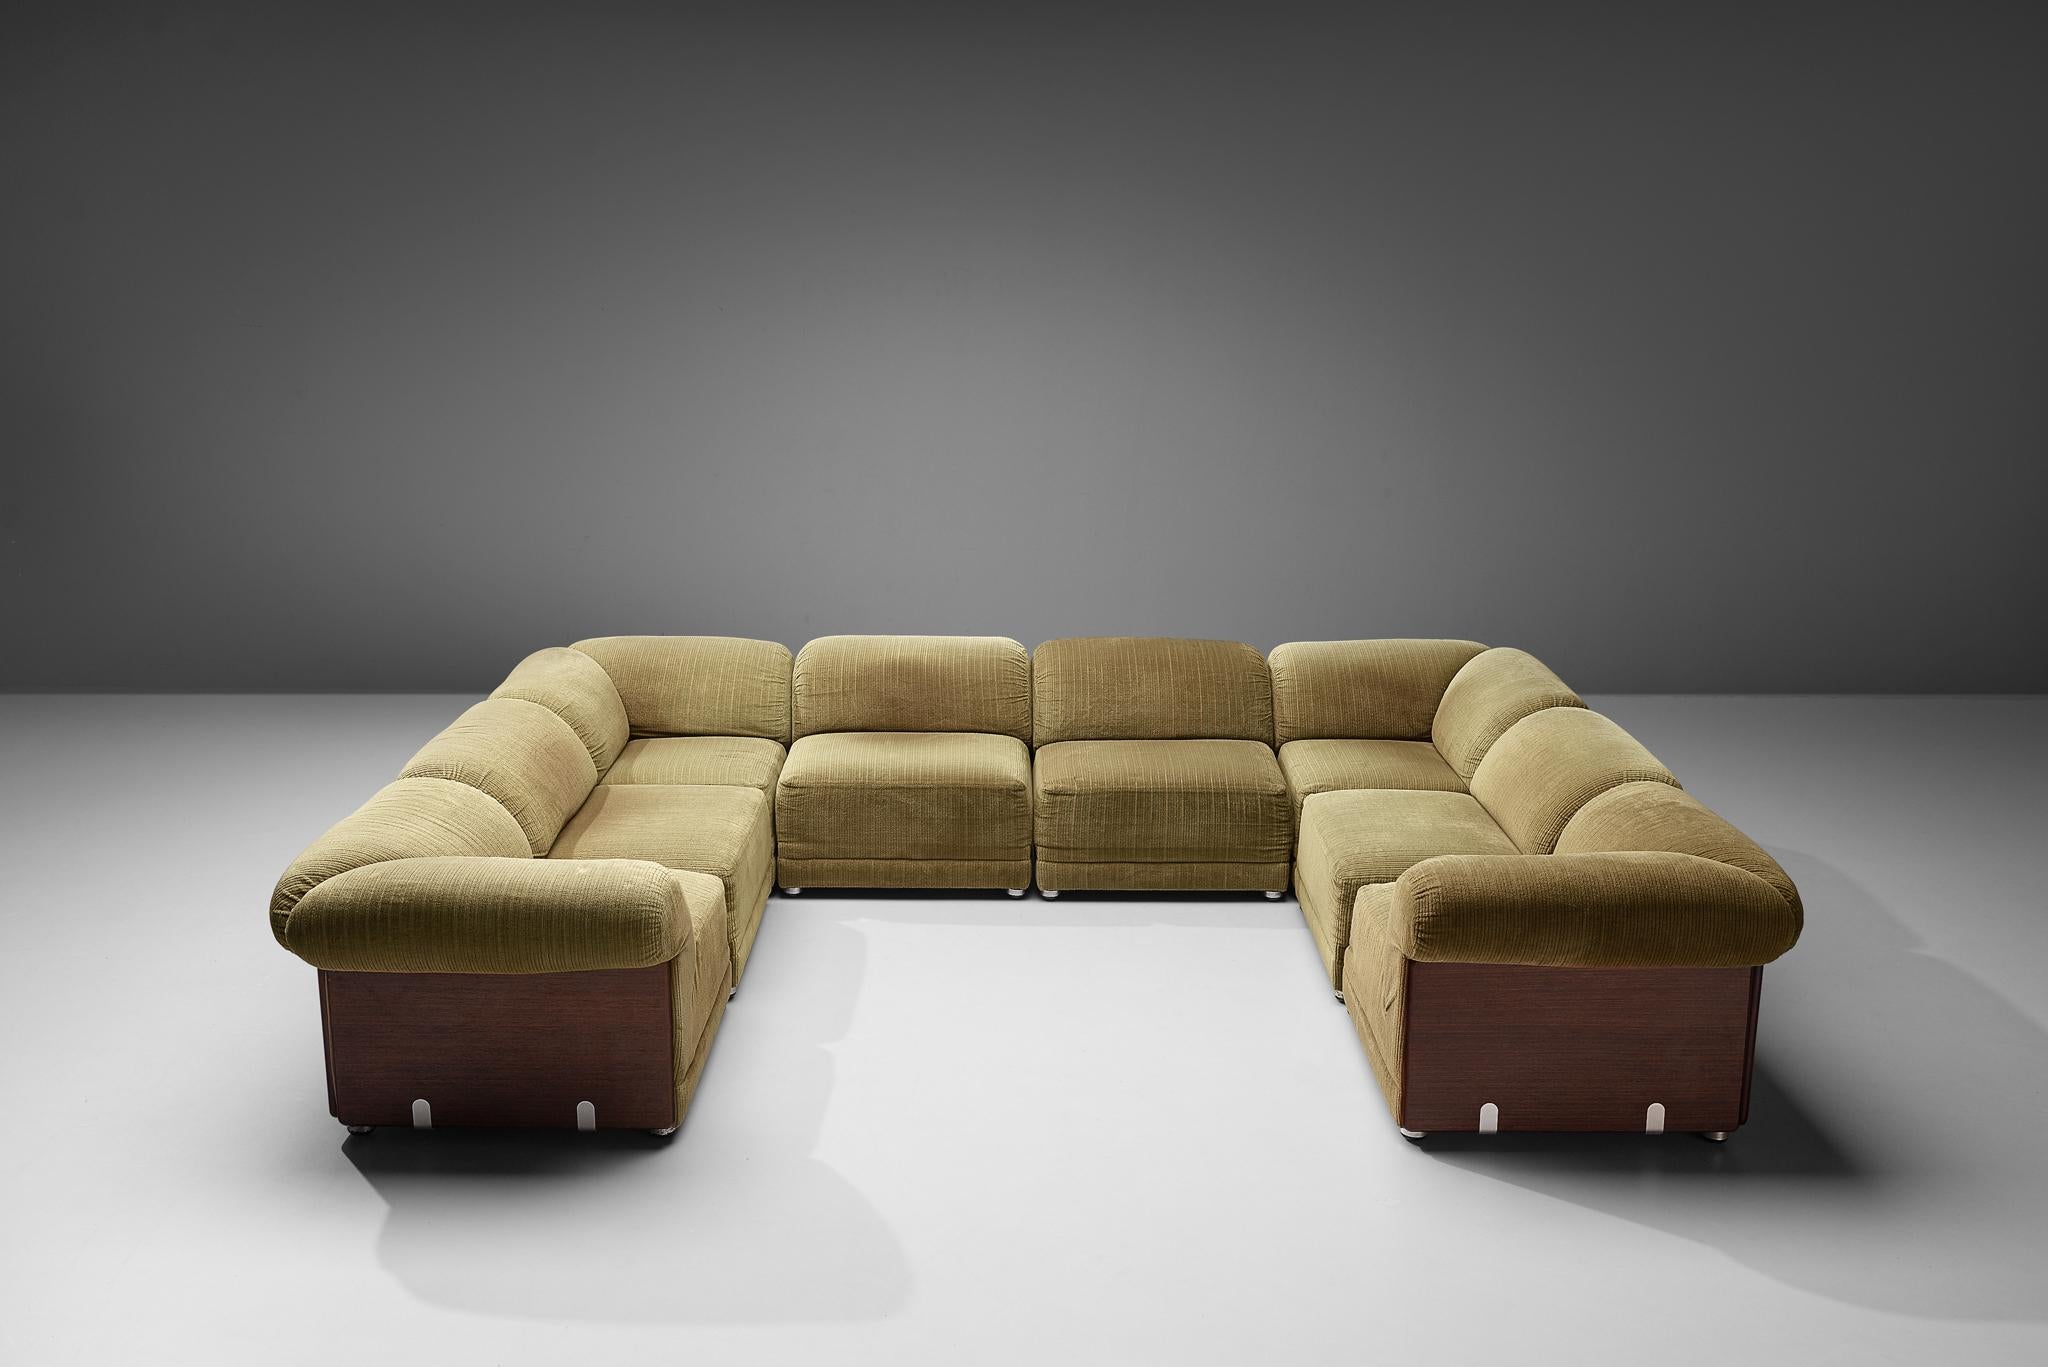 Mid-20th Century Sectional Sofa with Side Tables in Structured Velvet Upholstery